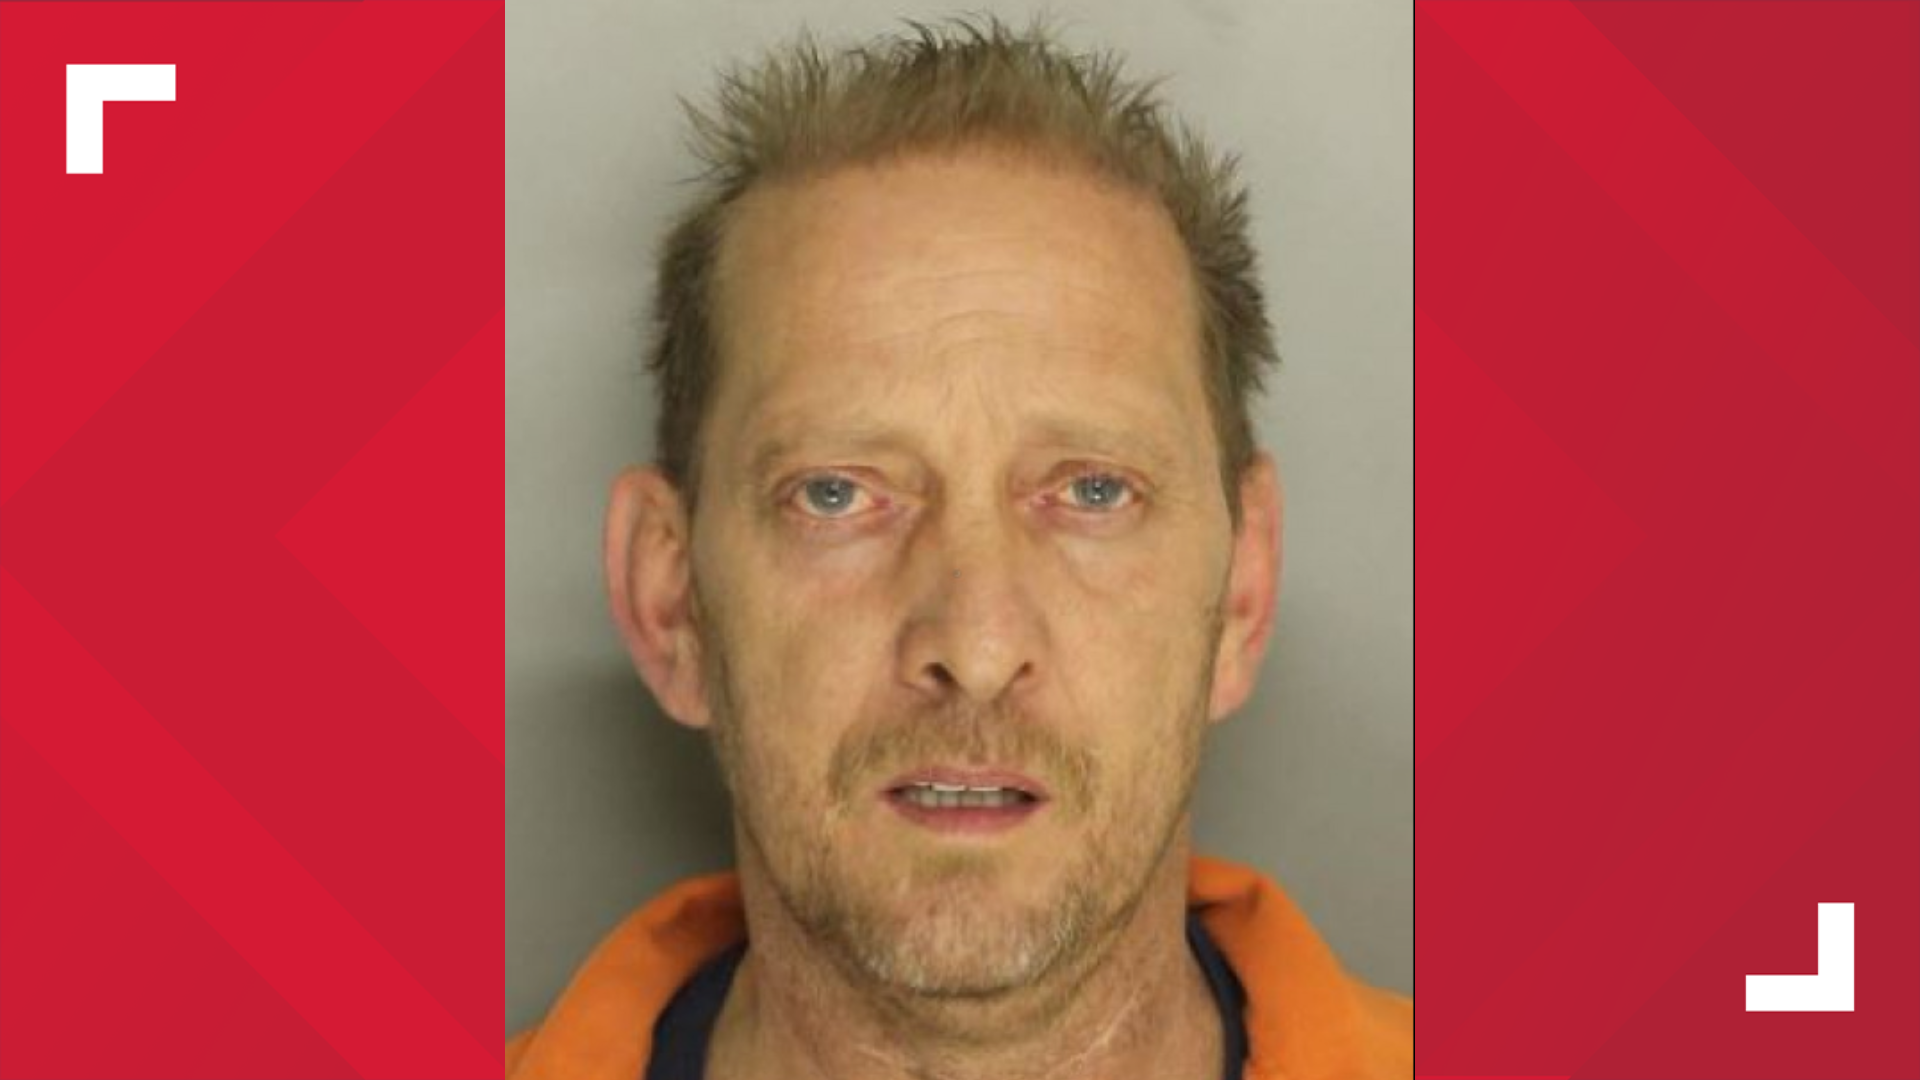 Shawn Stryker, 49, surrendered to authorities at about 9:15 p.m. after a standoff at his West Hempfield Township home.